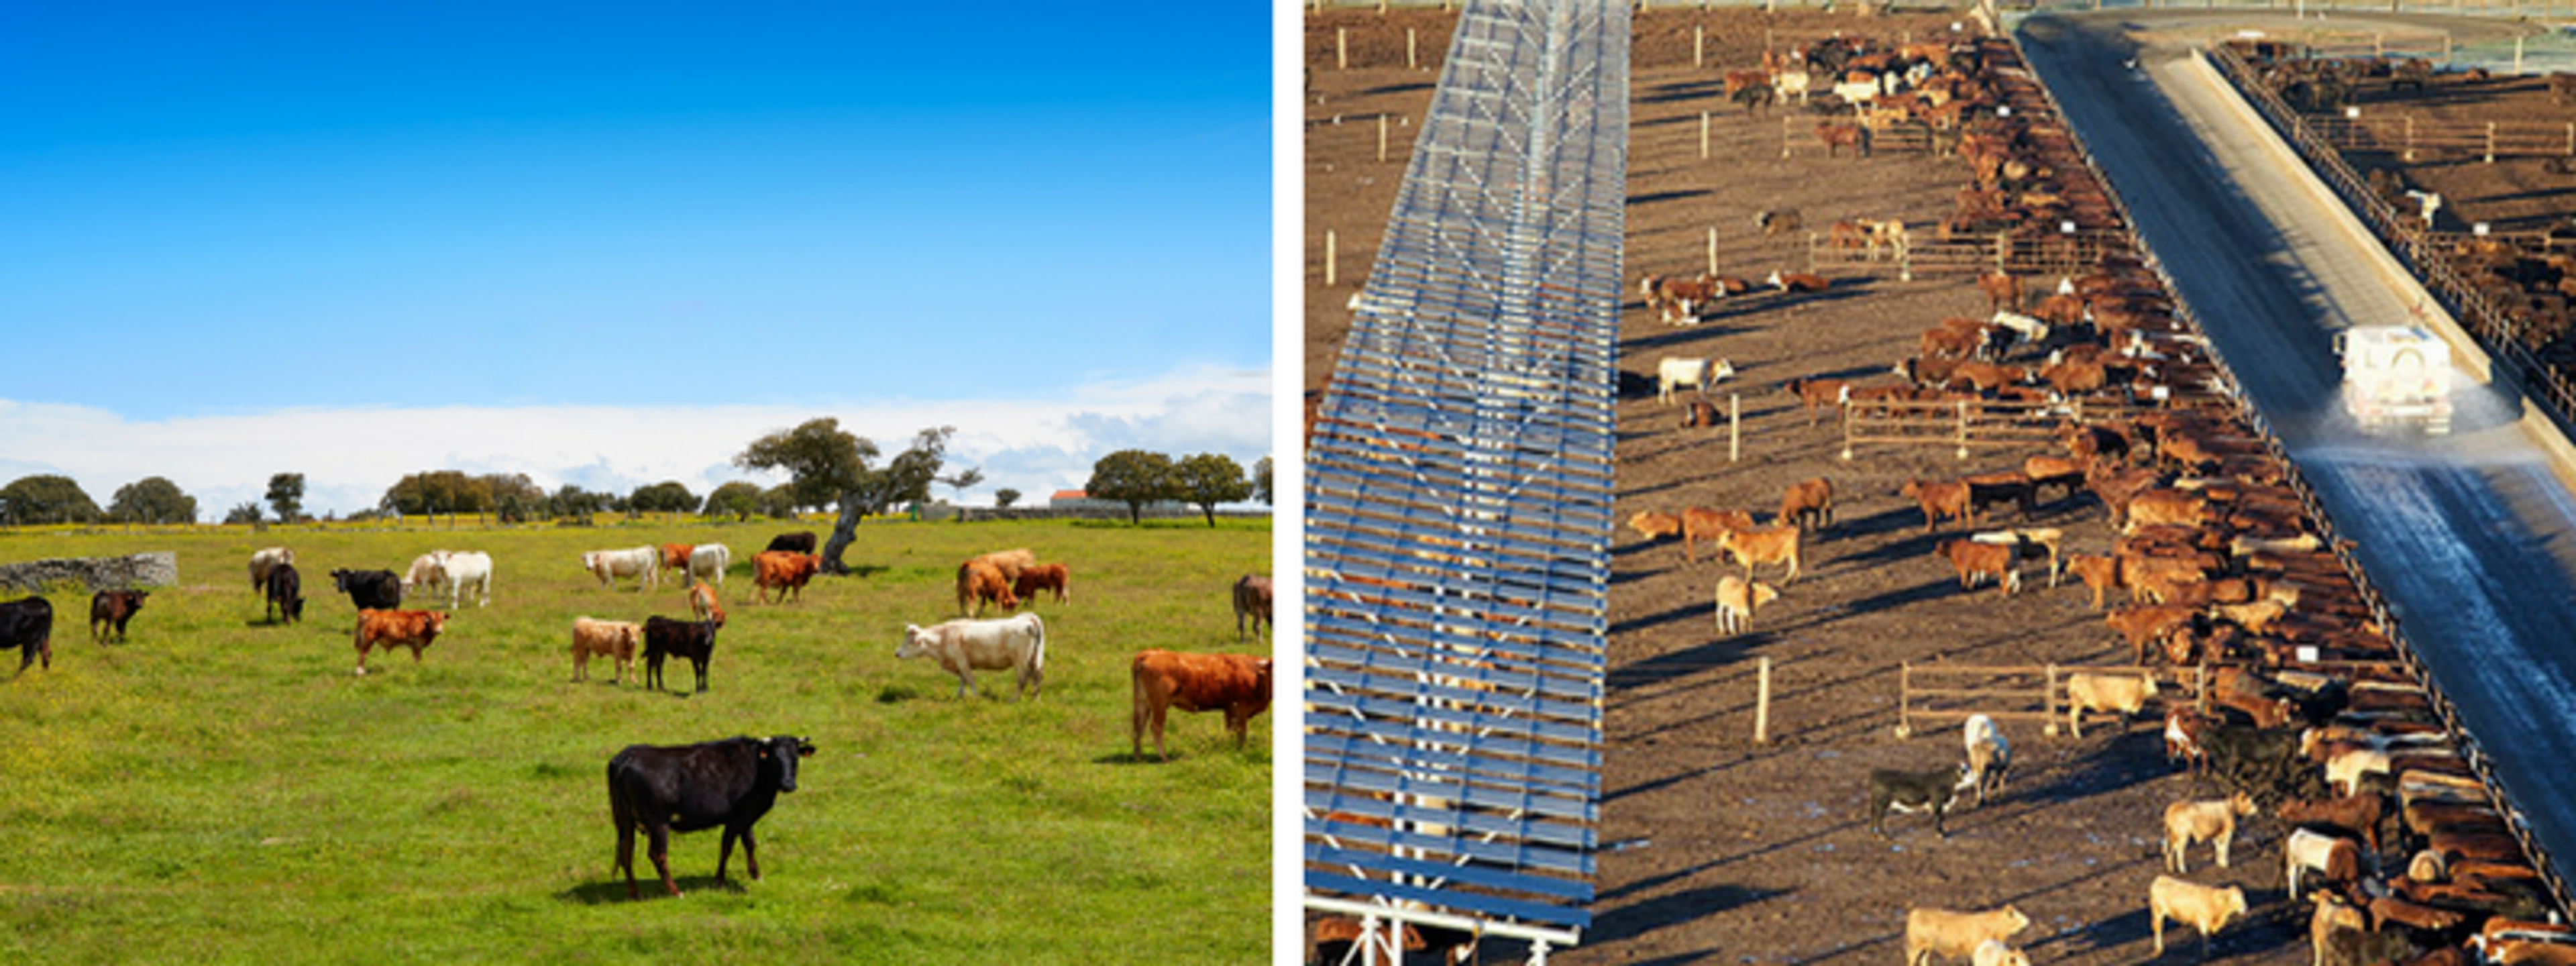 On the left there are lots of brown, black and white cows standing in a green paddock on a sunny day. On the right there are lots of brown and white cows in a feeding lot with a dirt ground and metal structures. 